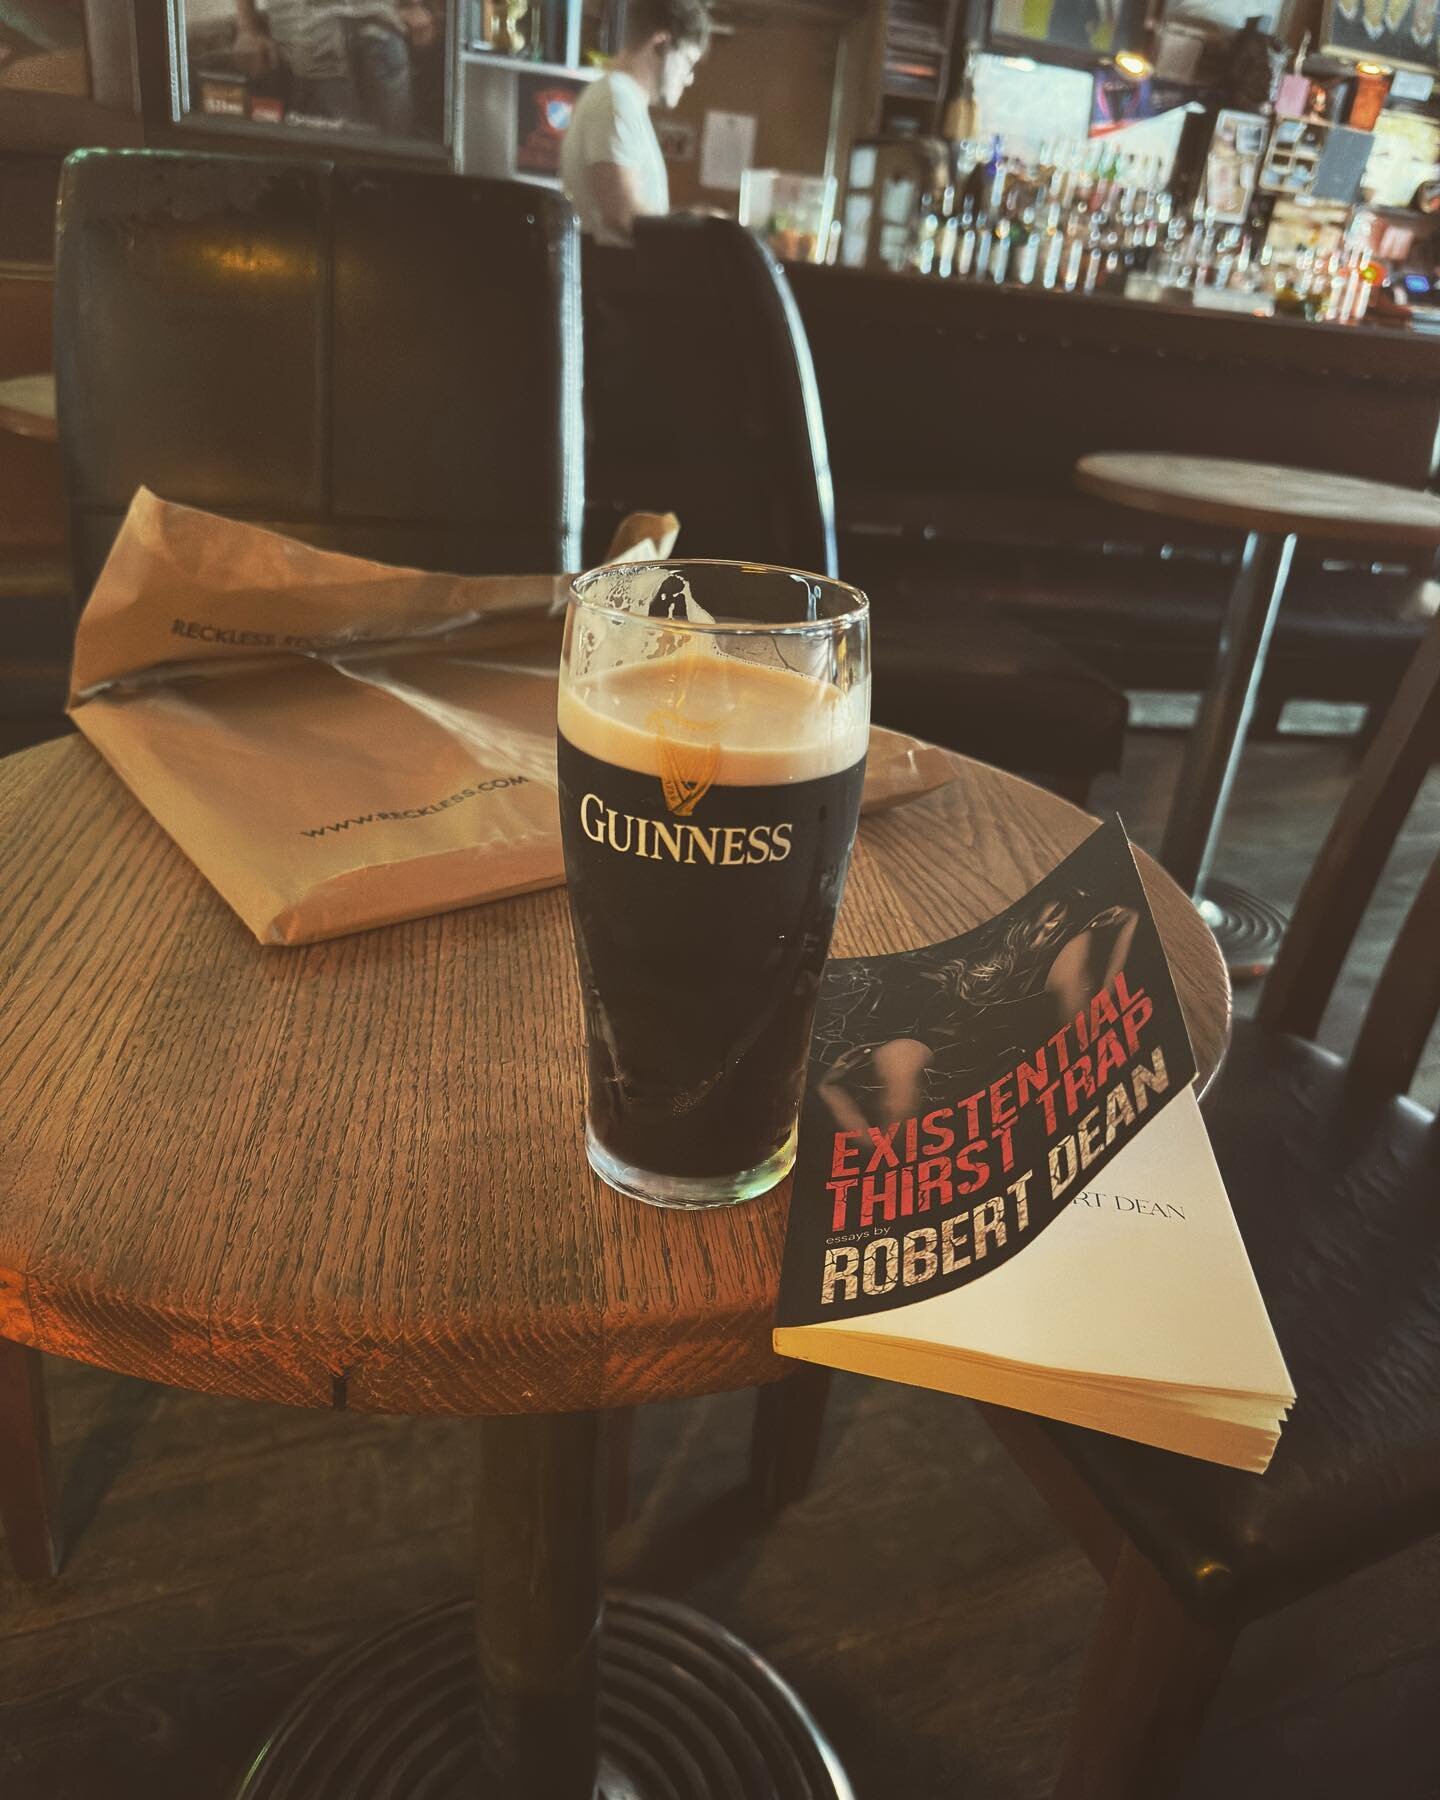 Current mood at The Old Town Alehouse in Chicago enjoying a @guinness and reading @literallyrobertdean #jazzonthejukebox #oldtownalehouse #chicago #guinness #robertdean #authors #sundaypint #existentialthirsttrap #oldtownalehousechicago